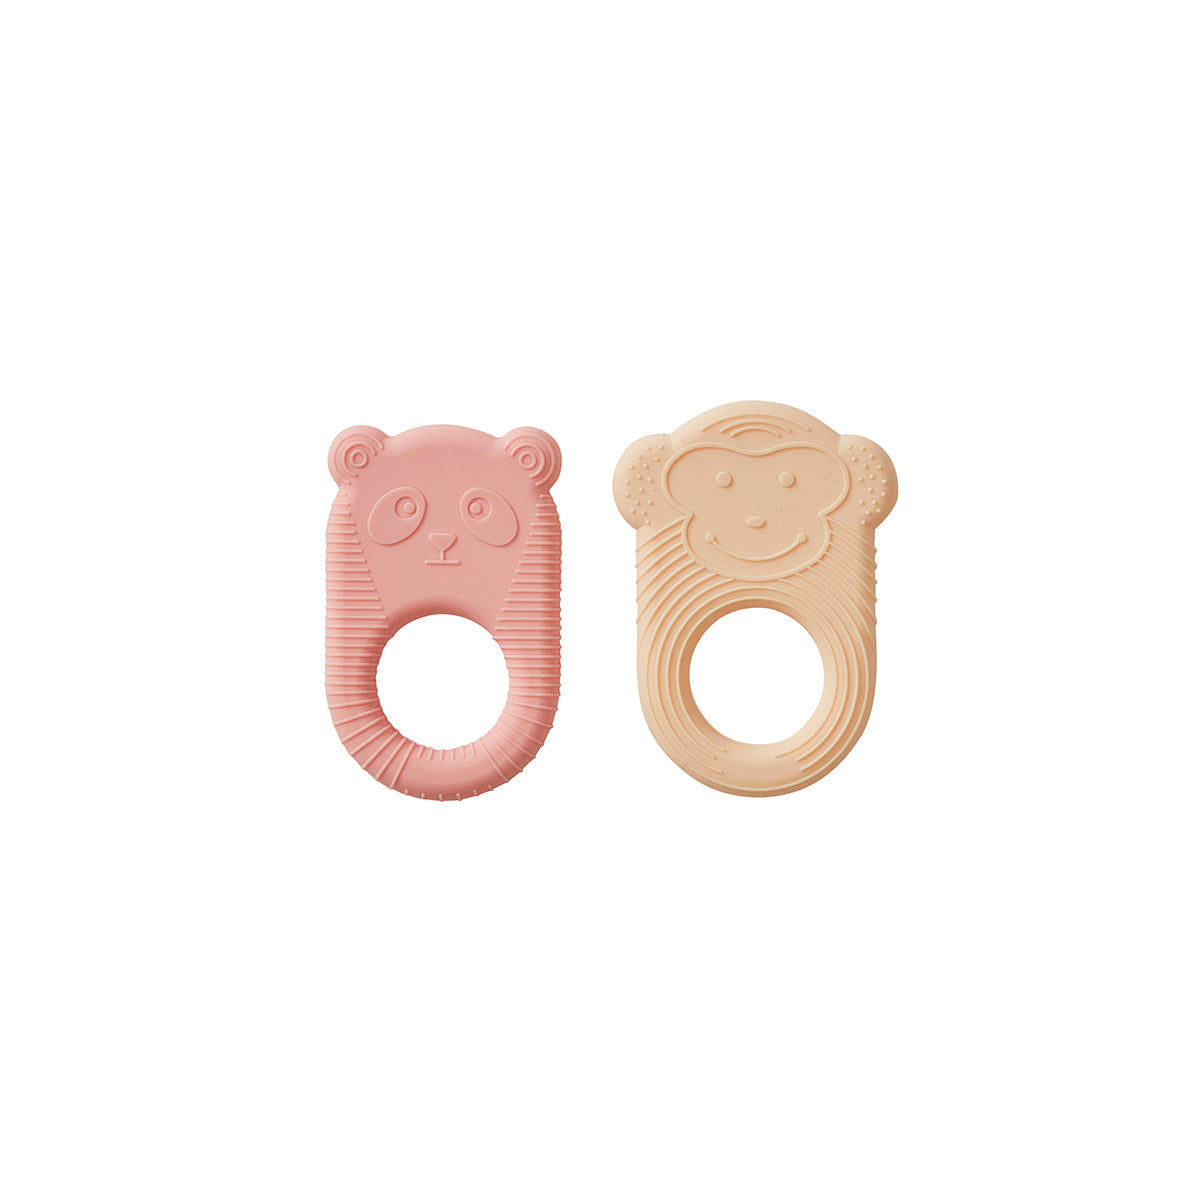 2x Nelson & Ling Ling Baby Beißring Silikon Rosa Beige